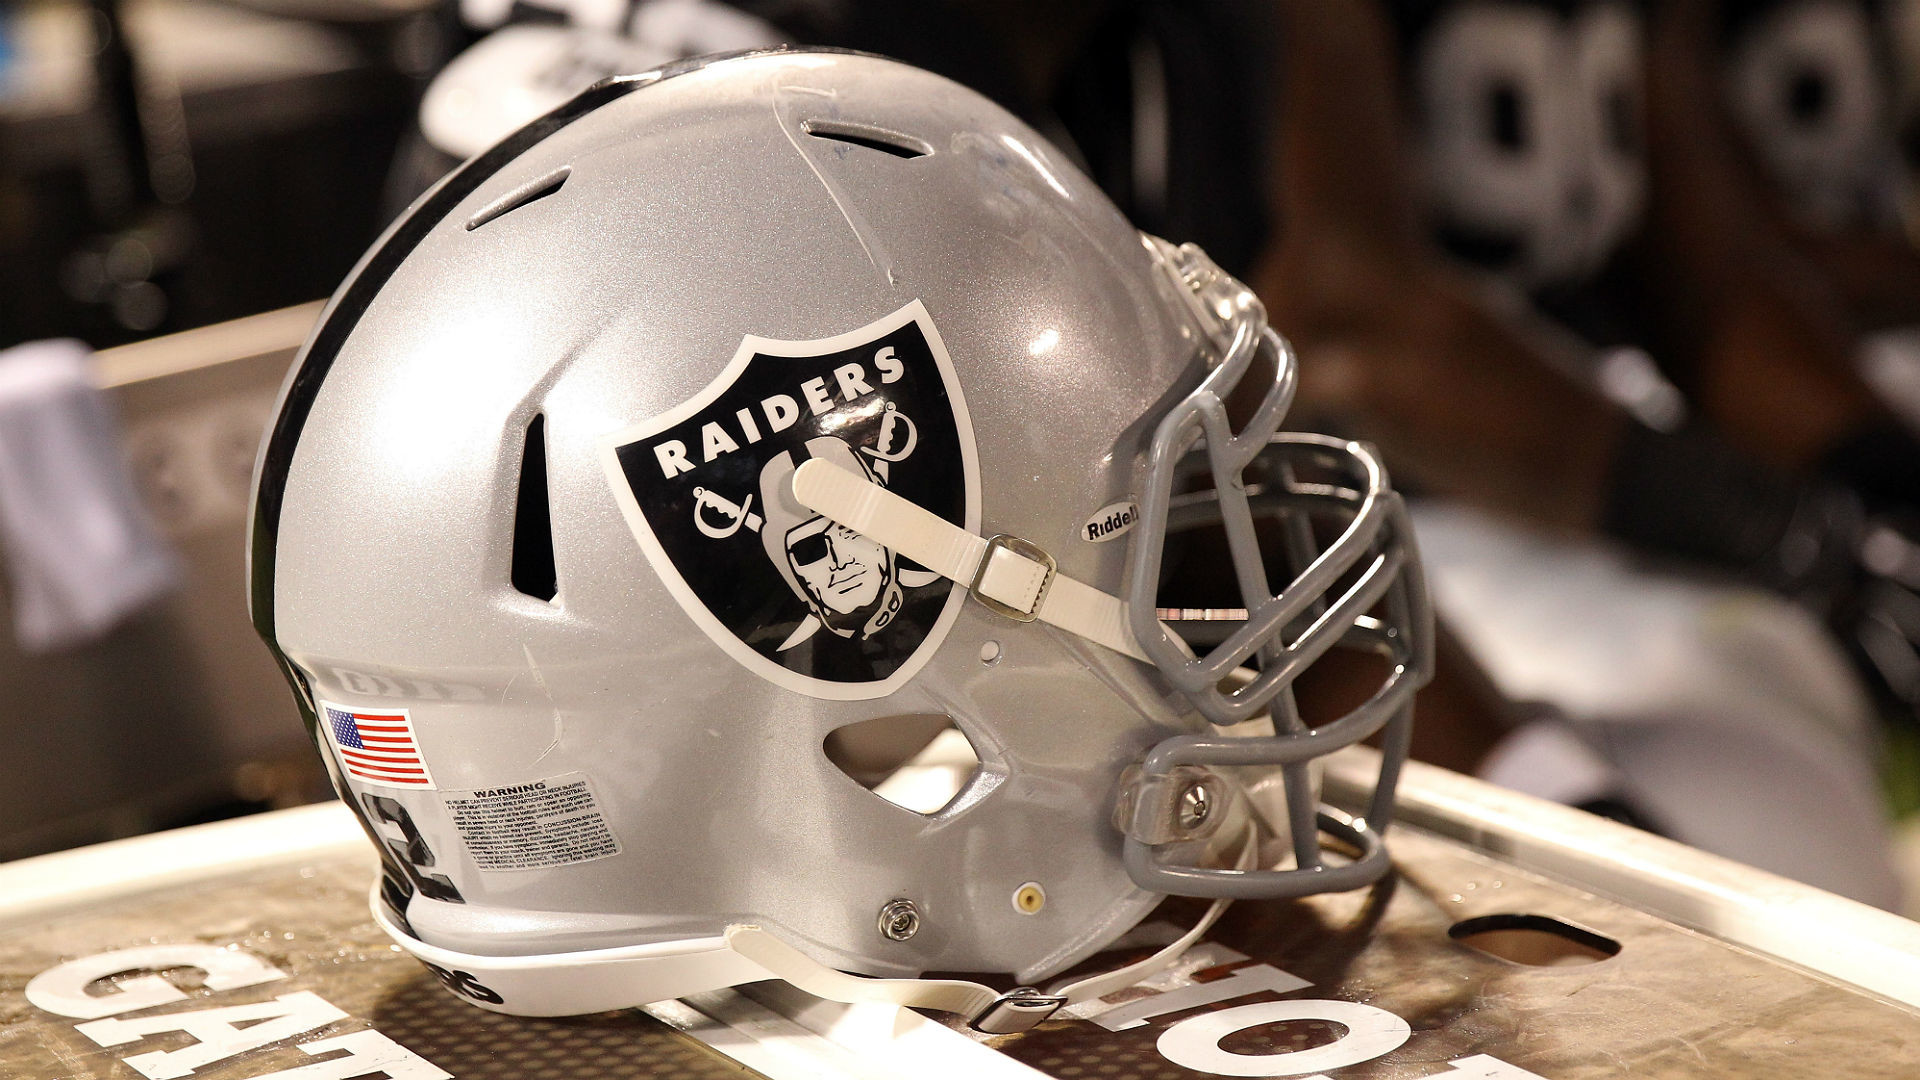 1920x1080 Oakland suing Raiders, NFL for antitrust violations, breach of contract